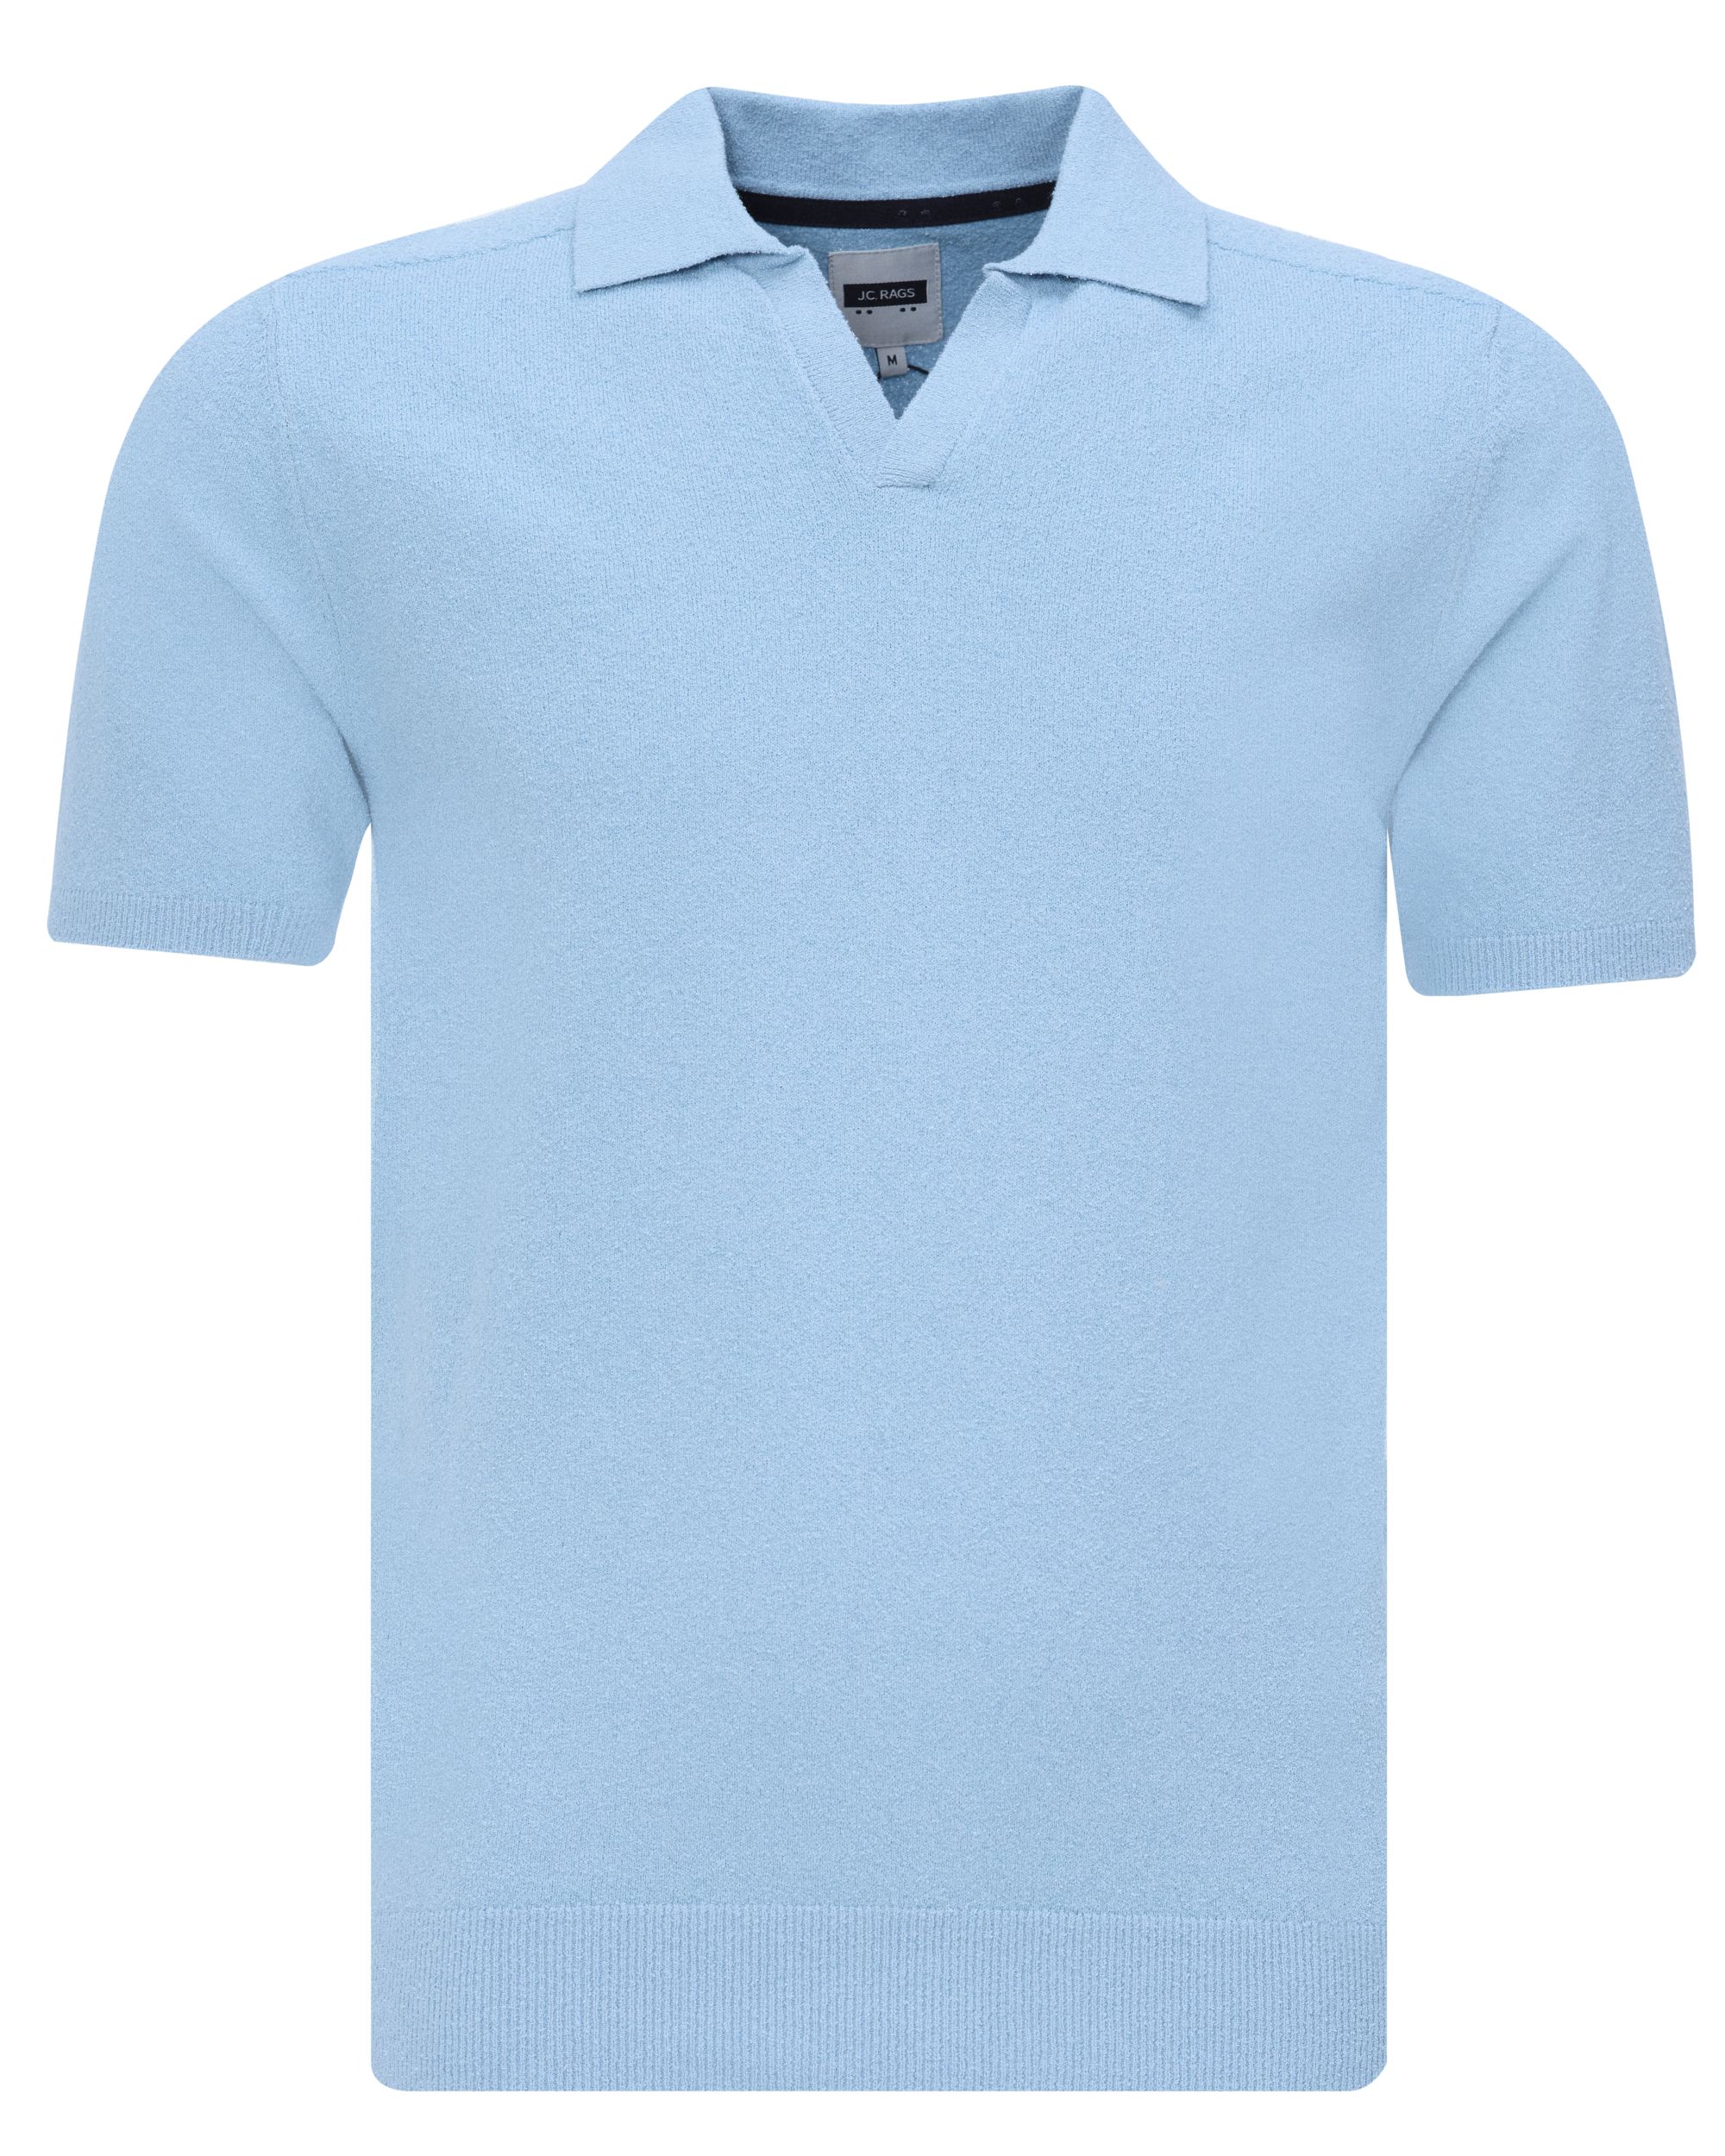 J.C. RAGS Polo KM Forget-me-not 081480-002-L